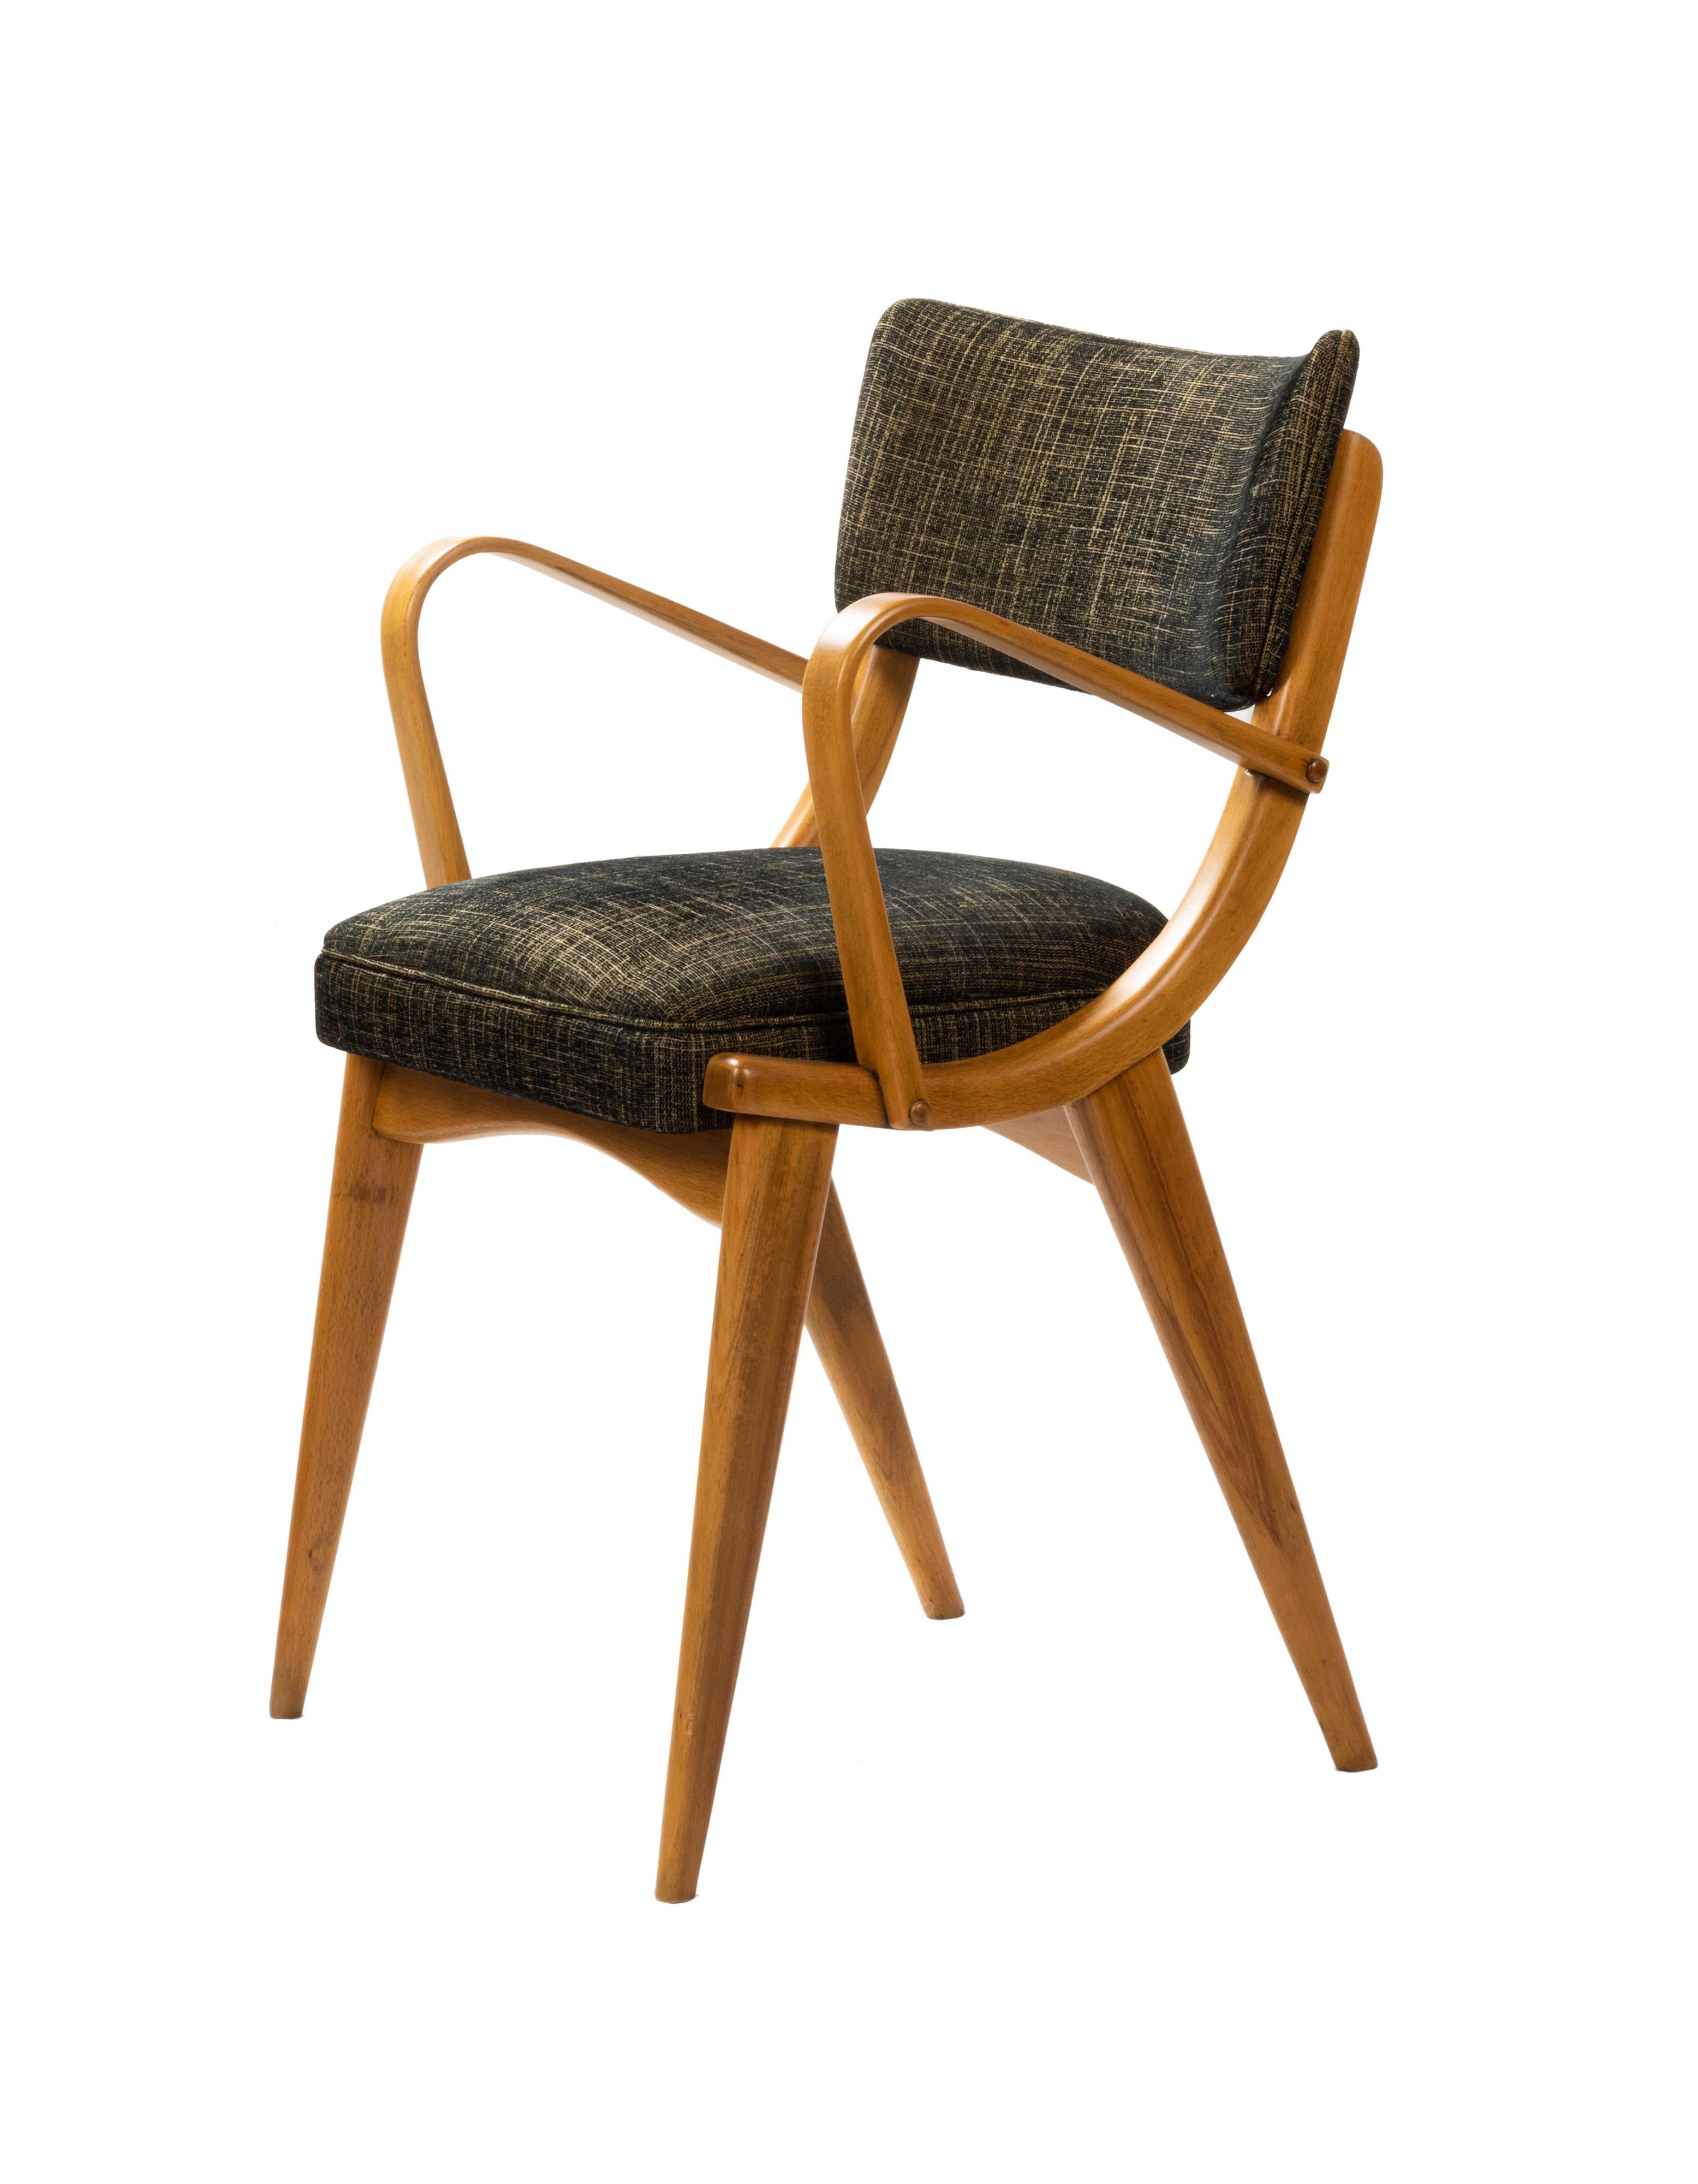 Mid Century Period Set Of Armchairs, (1952 - 1960), Denmark   
9323

A spectacular Mid Century period set of four armchairs with well preserved structure, arms, and legs, great upholstery, and a strong esthetic sense, a highly desirable décor